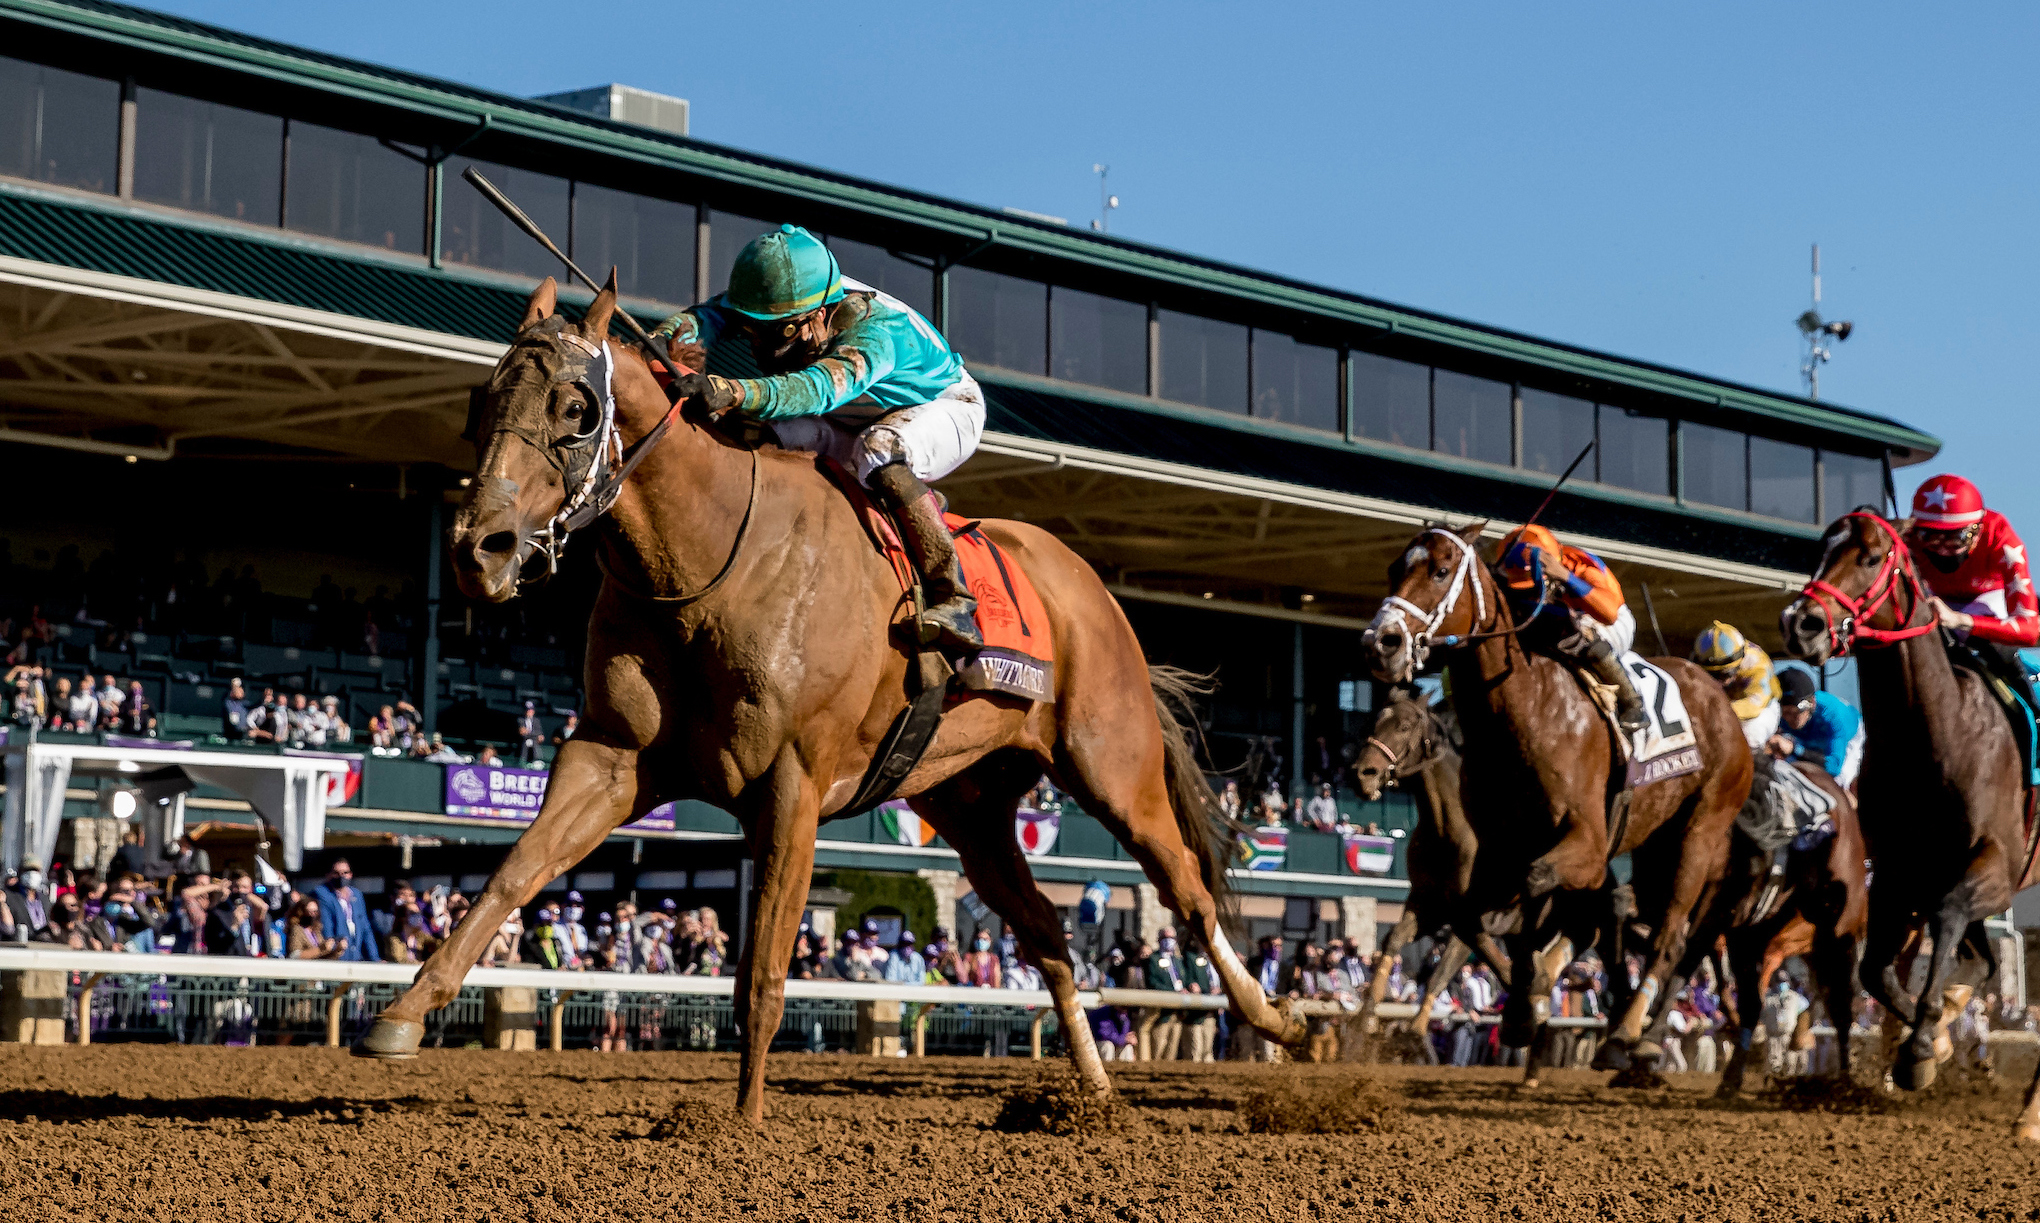 Triumph at last: Whitmore (Irad Ortiz) wins the BC Sprint at the fourth attempt. It was in track-record time, but his trainer, Ron Moquett says, “I have chased fast horses on big days my entire life … it was just very good horses out there setting those fractions.” Photo: Alex Evers/Eclipse Sportswire/Breeders Cup/CSM